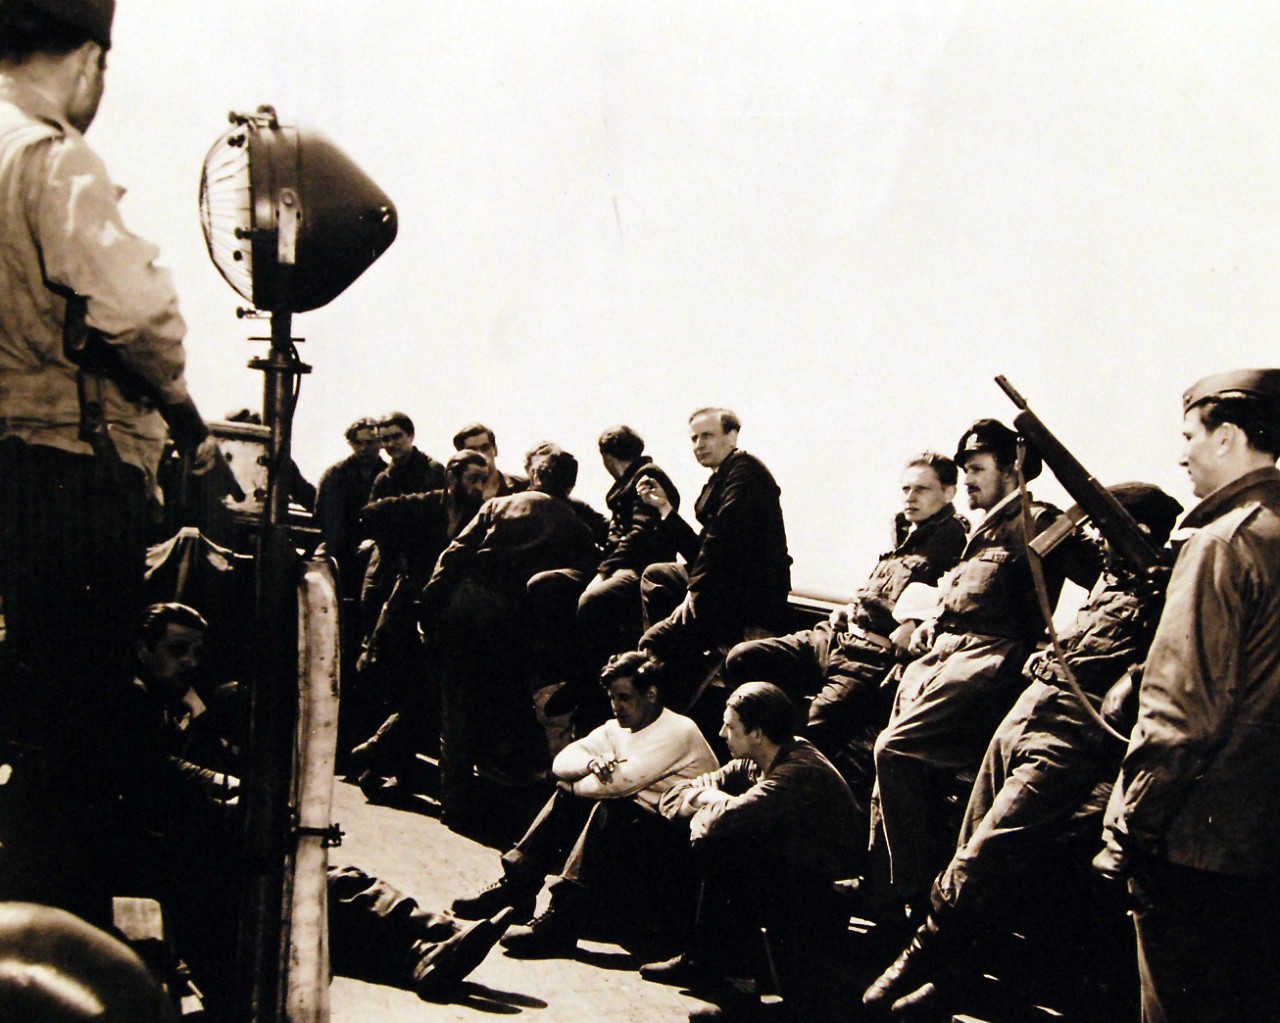 <p>80-G-700487: Surrender of German U-Boats, 1945Officers and men of German submarine, U-858, on a U.S. tug while being taken to Fort Miles on the Delaware Bay, May 1945. Their ship, which surrendered in the mid-Atlantic, was officially turned over to the Fourth Naval District. Photograph released May 10, 1945.&nbsp;</p>
